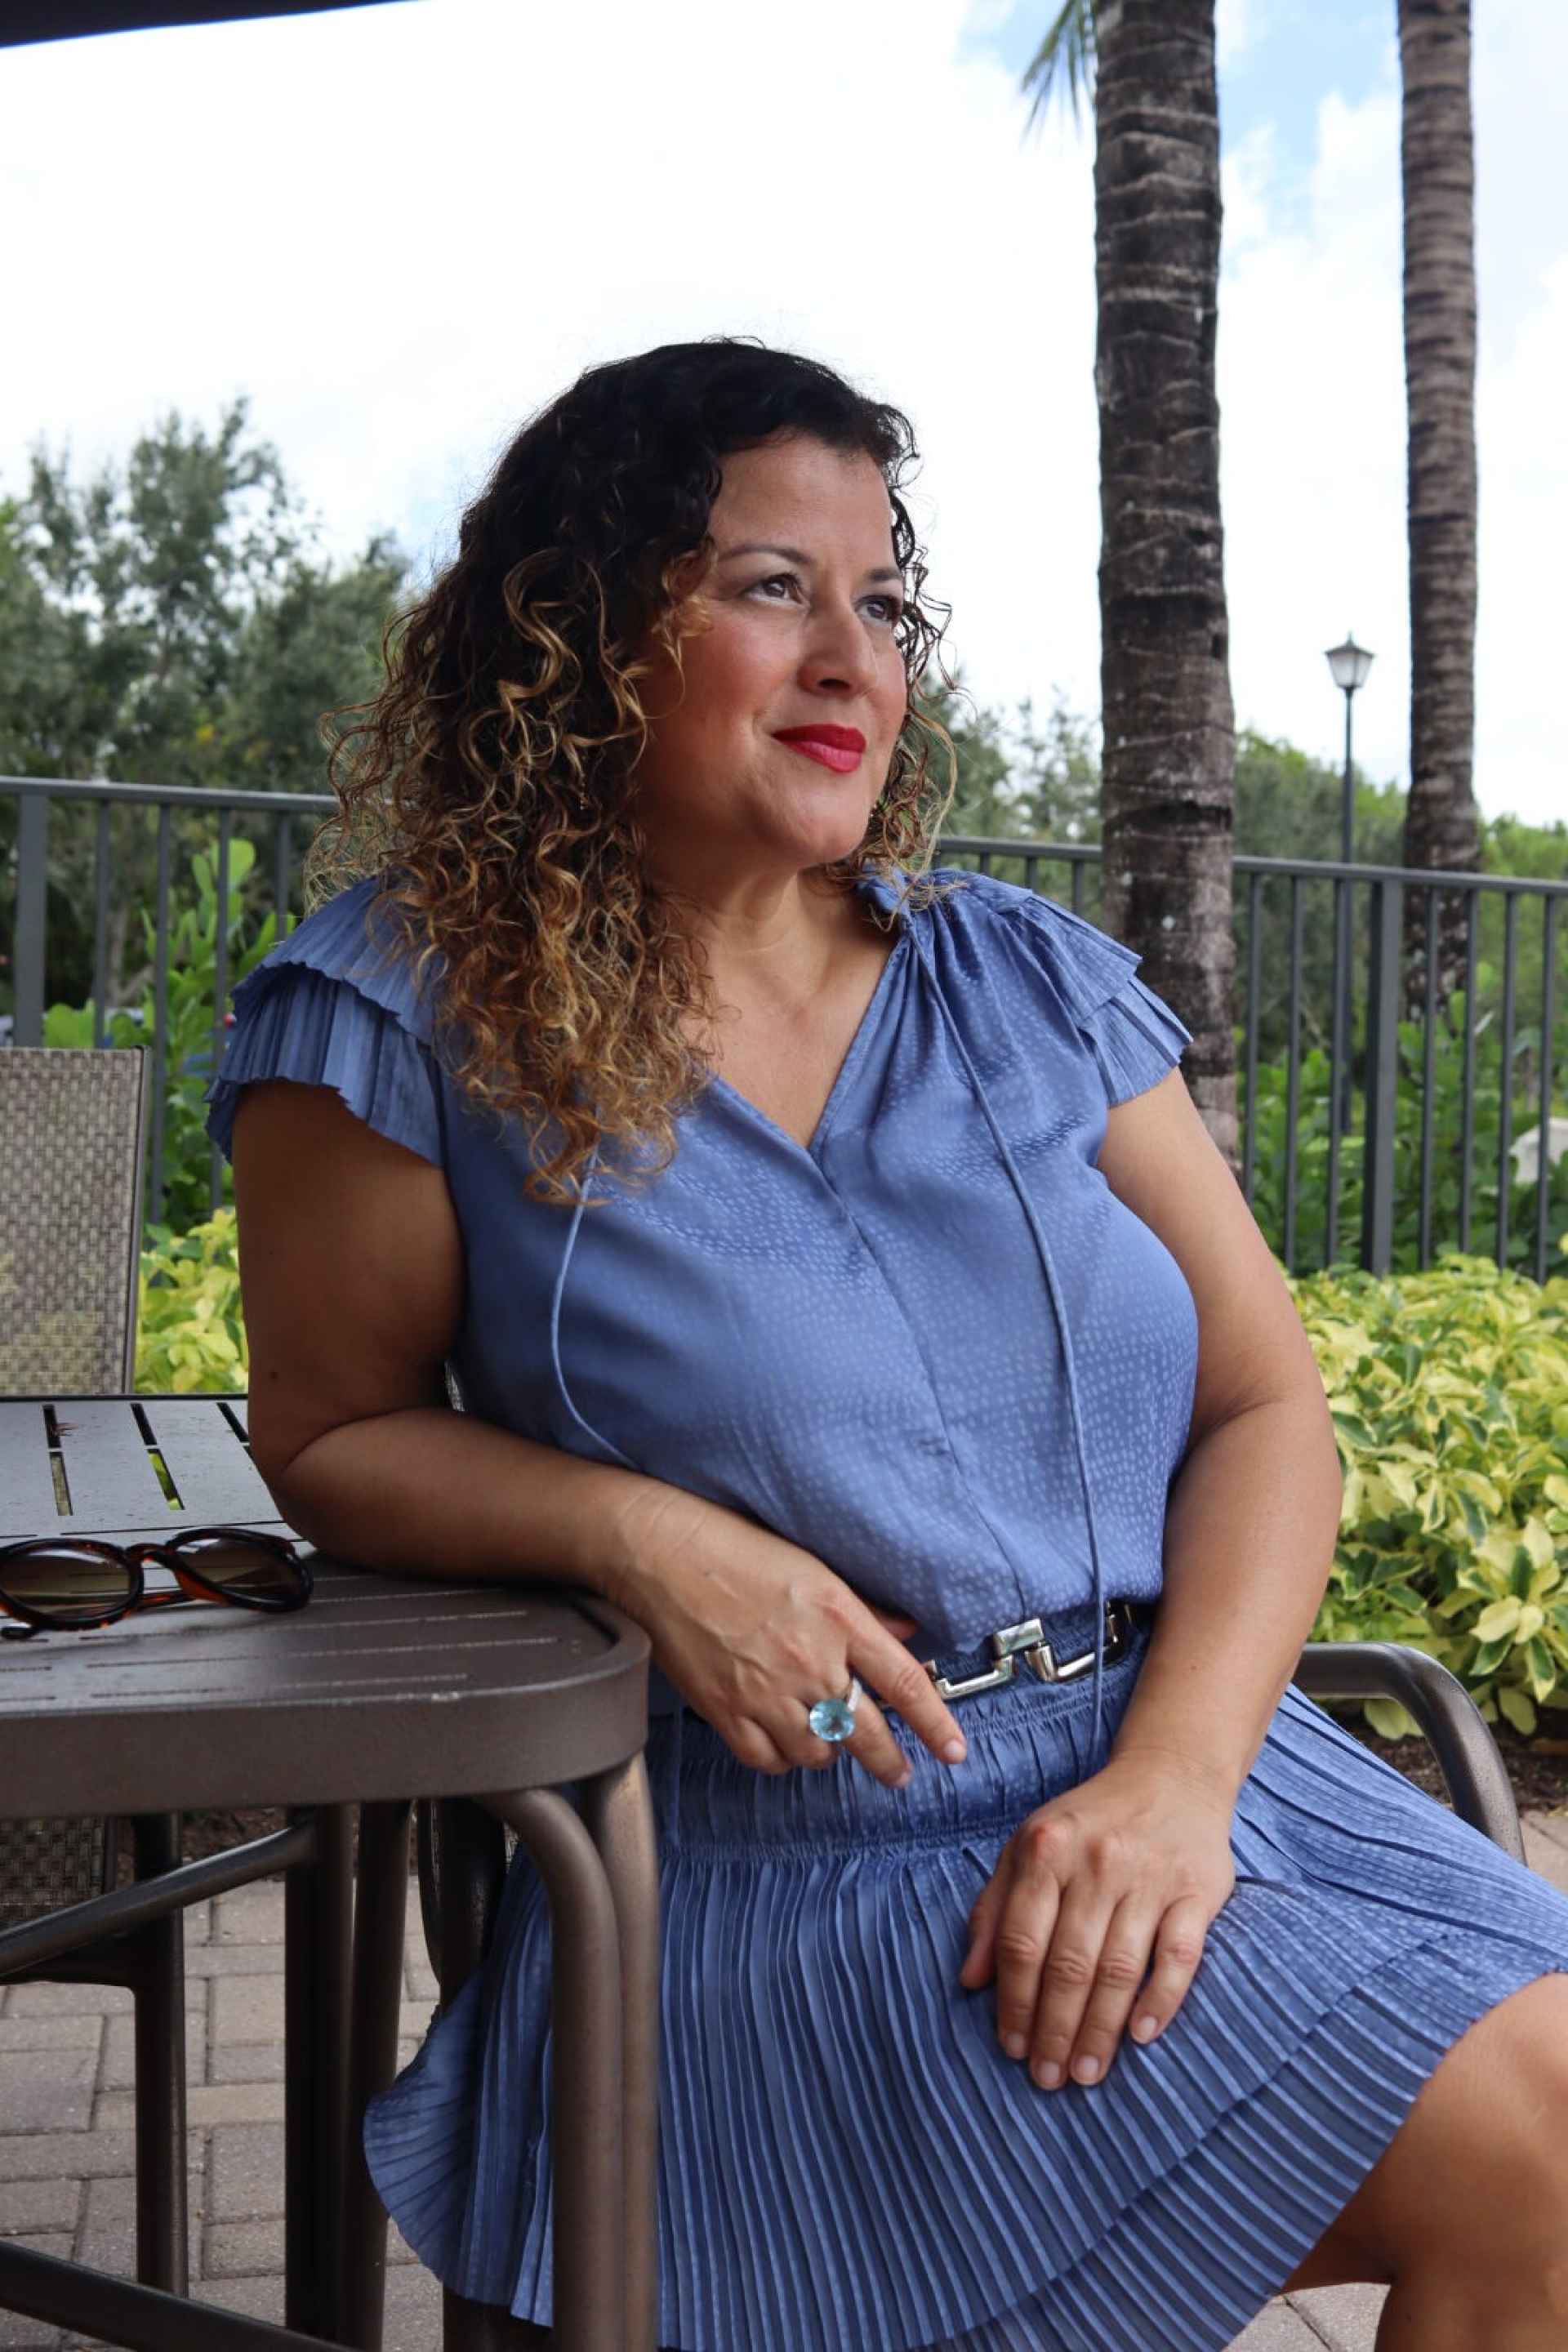 woman with dark curly hair in a blue outfit sitting outside during daytime